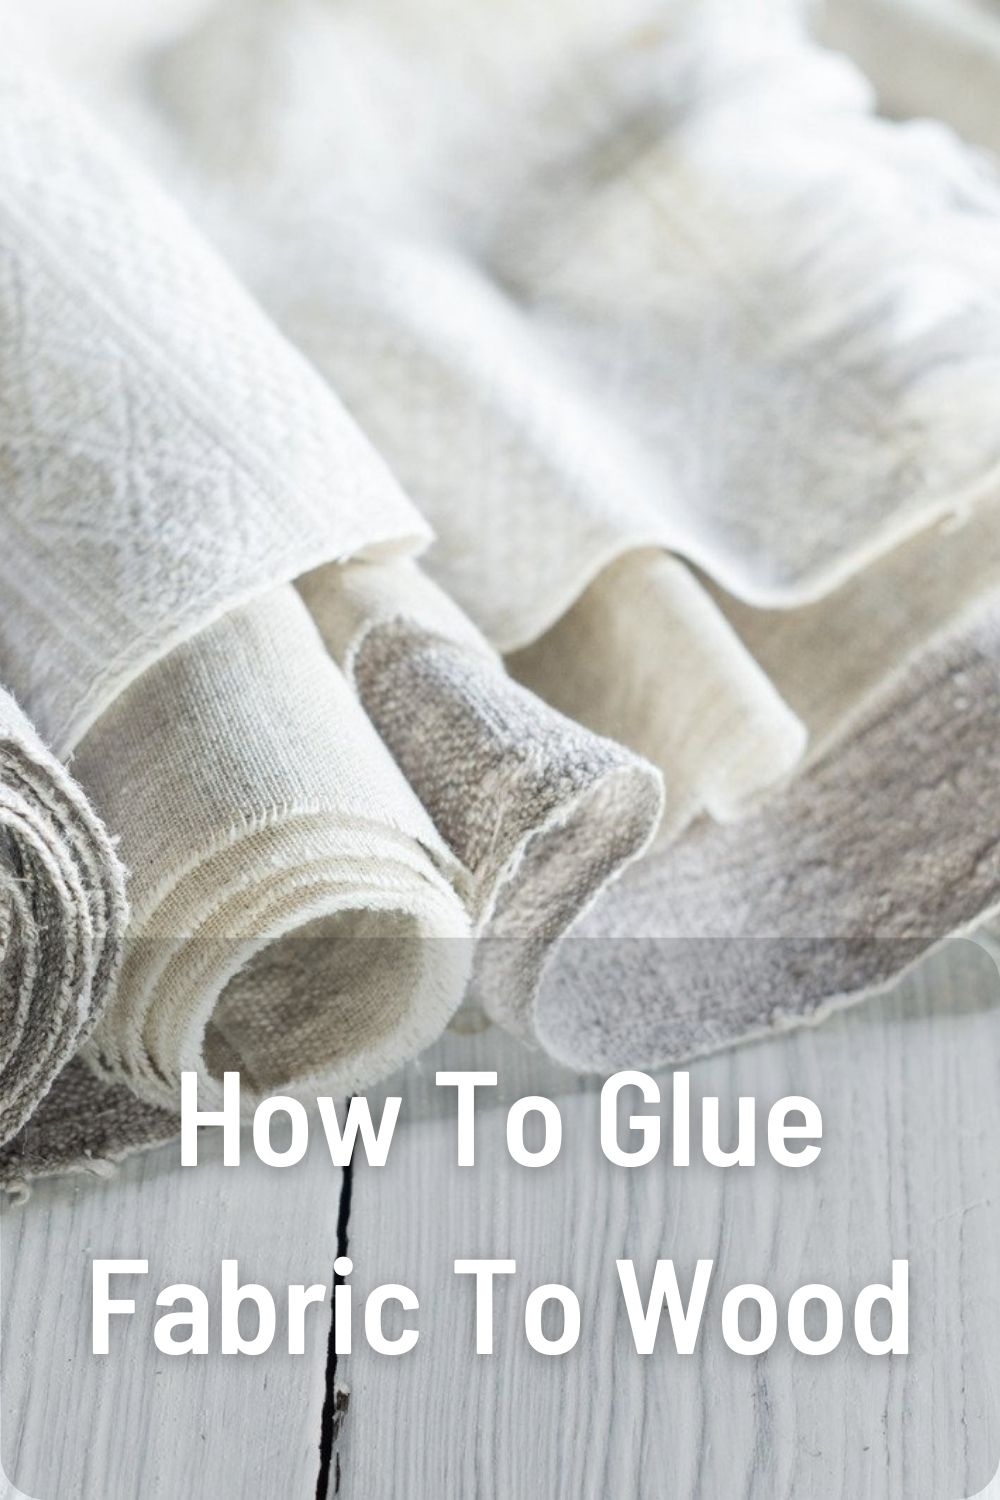 How To Glue Fabric To Wood